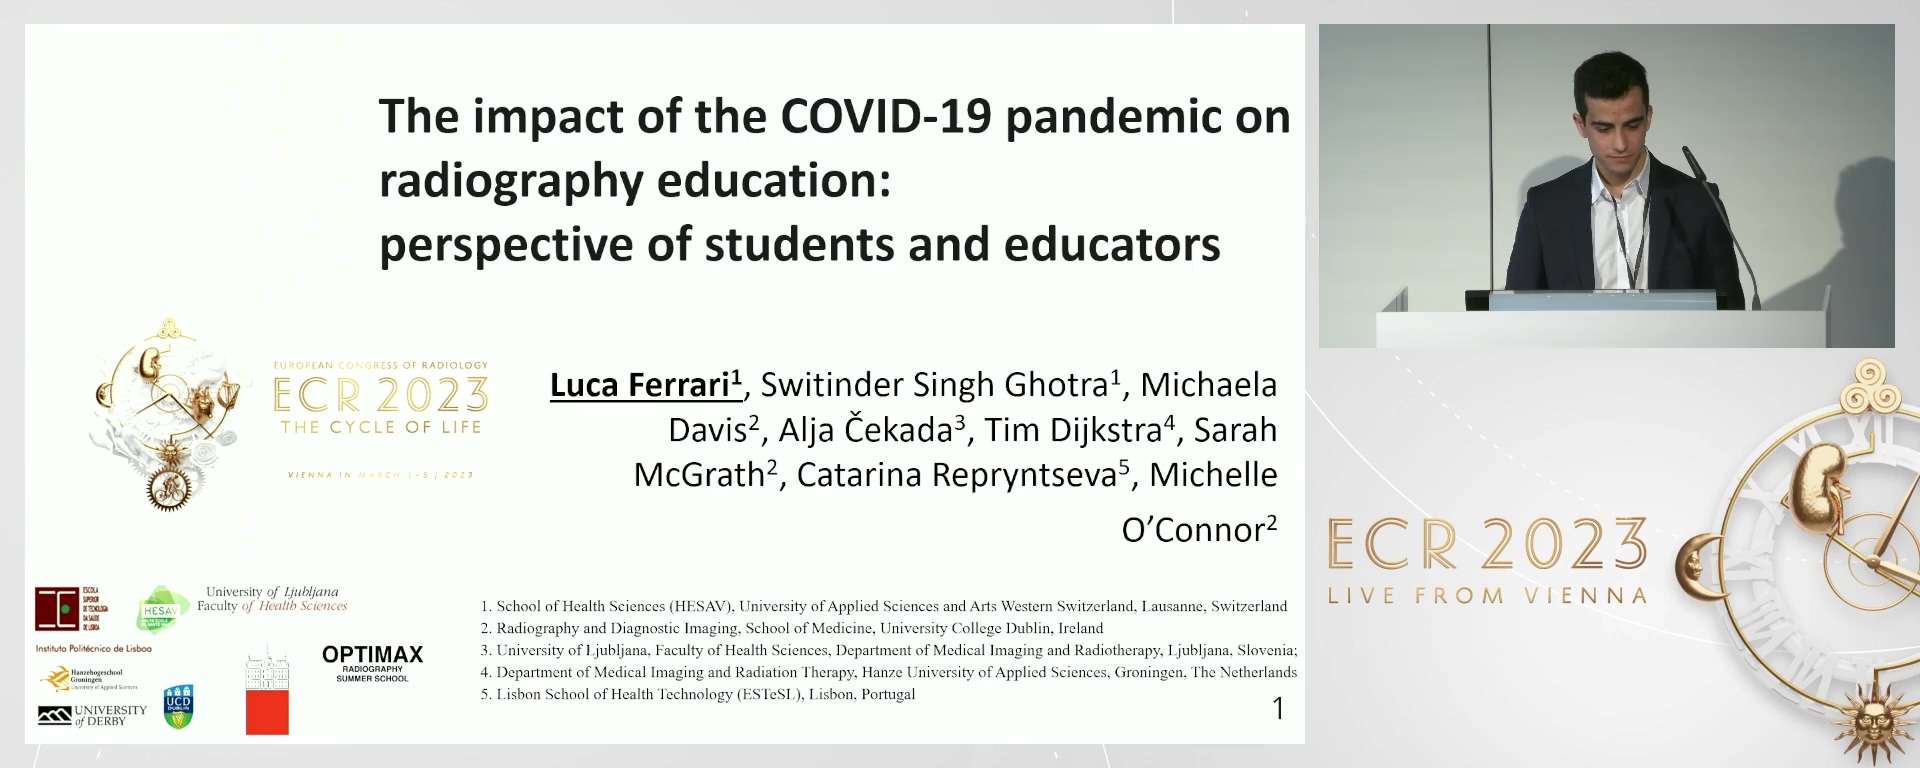 The impact of the COVID-19 pandemic on radiography education: perspective of students and educators - Luca  Ferrari, Pully / CH